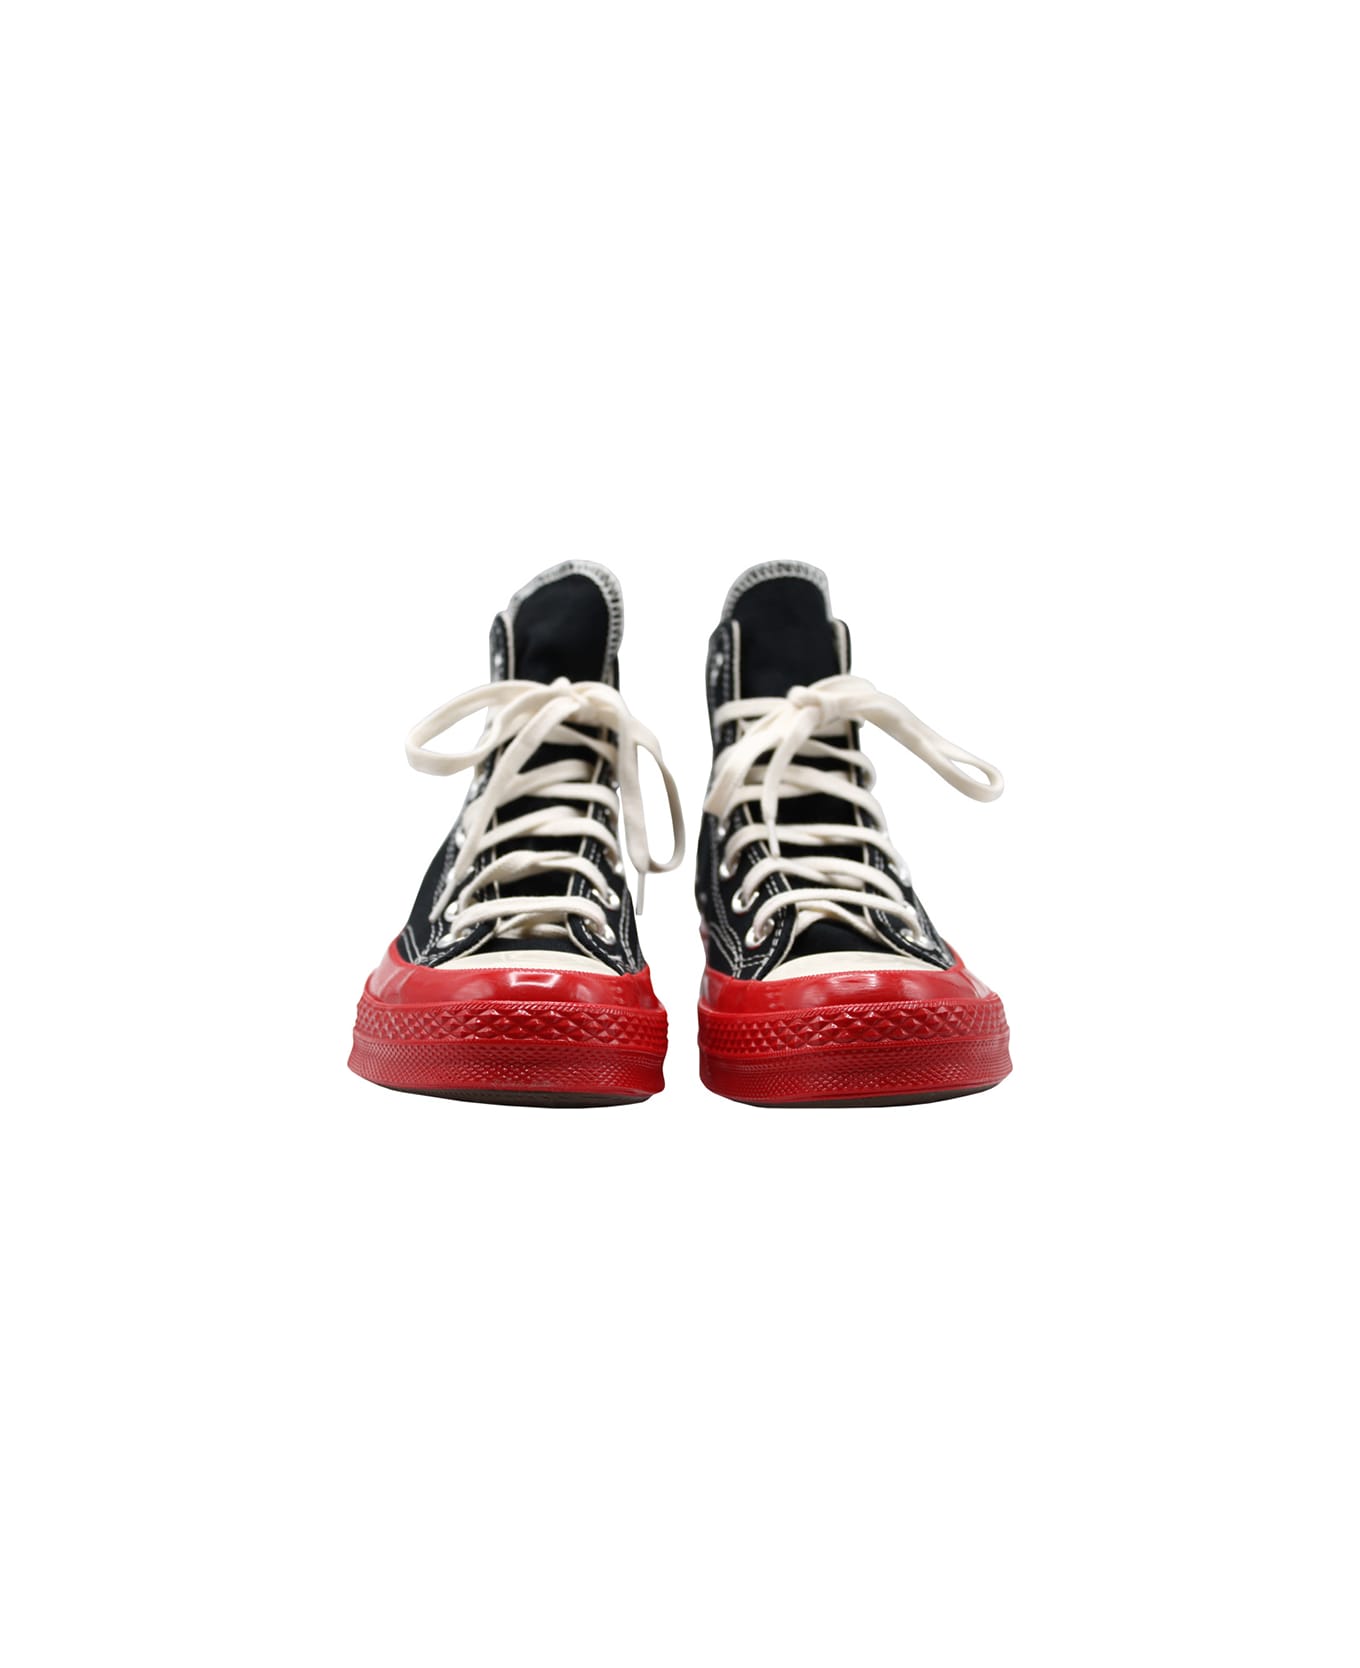 Comme des Garçons Play Red Sole Chuck 70 In Black